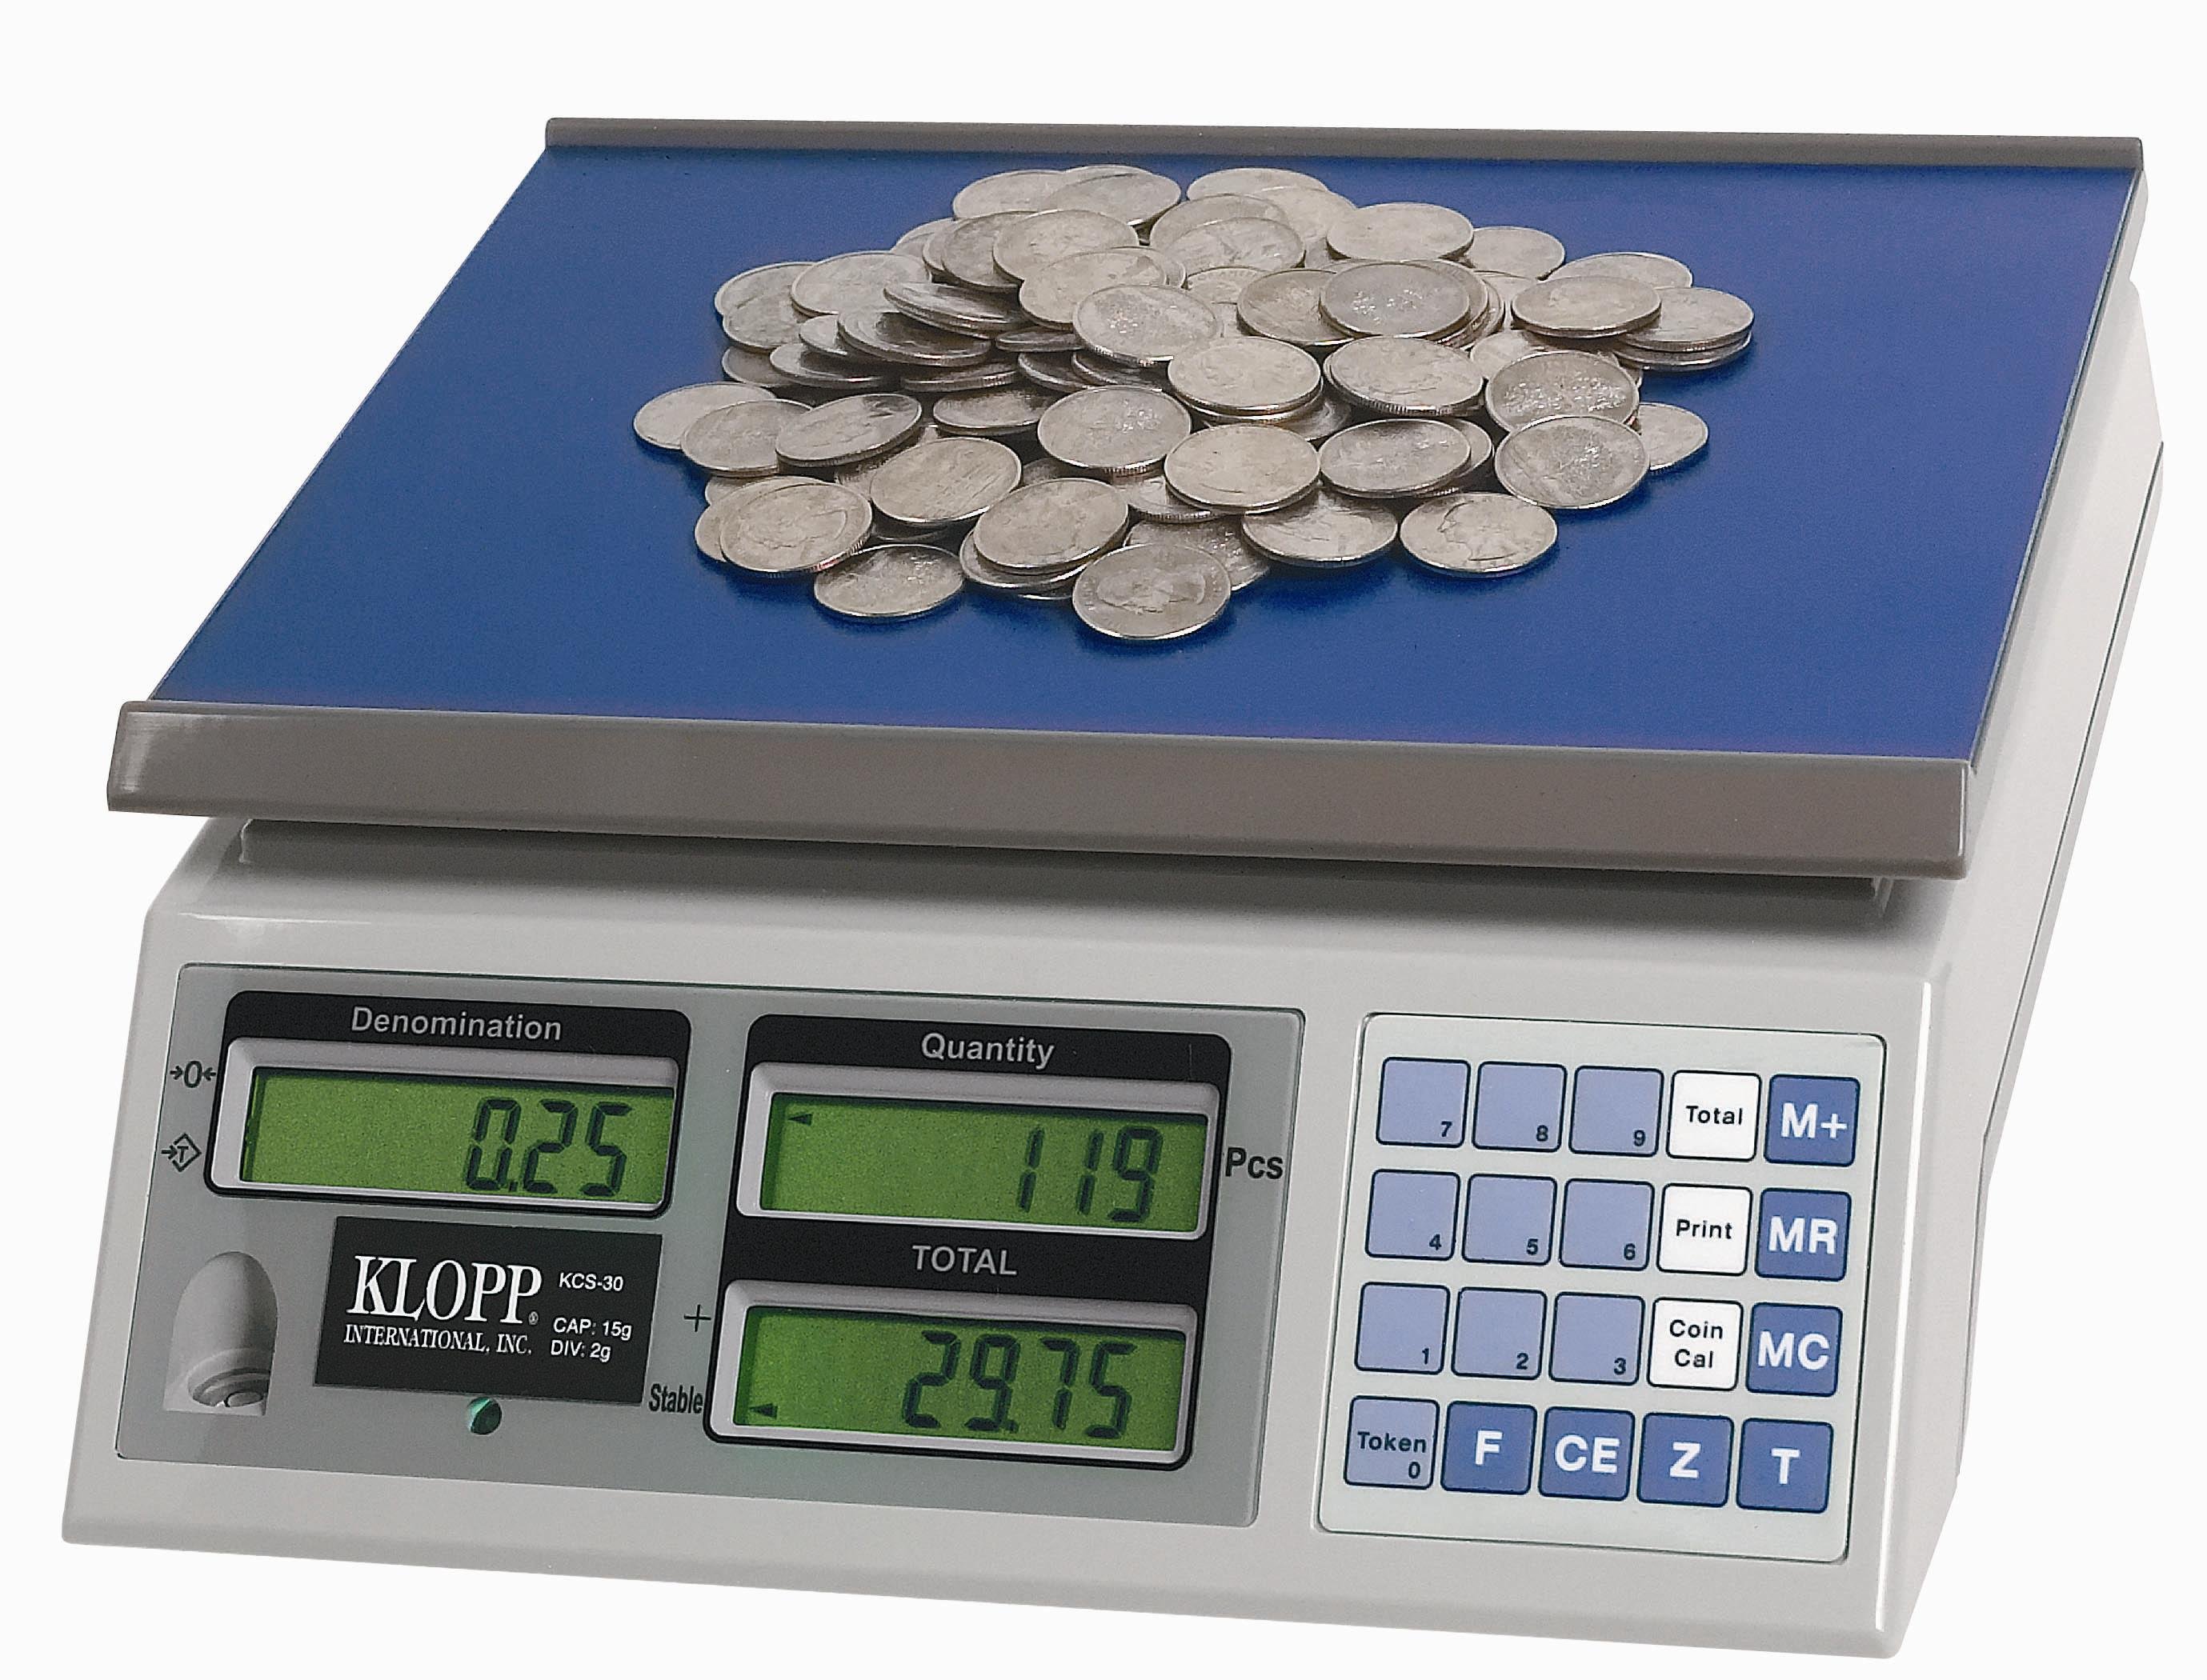 KLOPP: KCS Series Coin Counting Scales